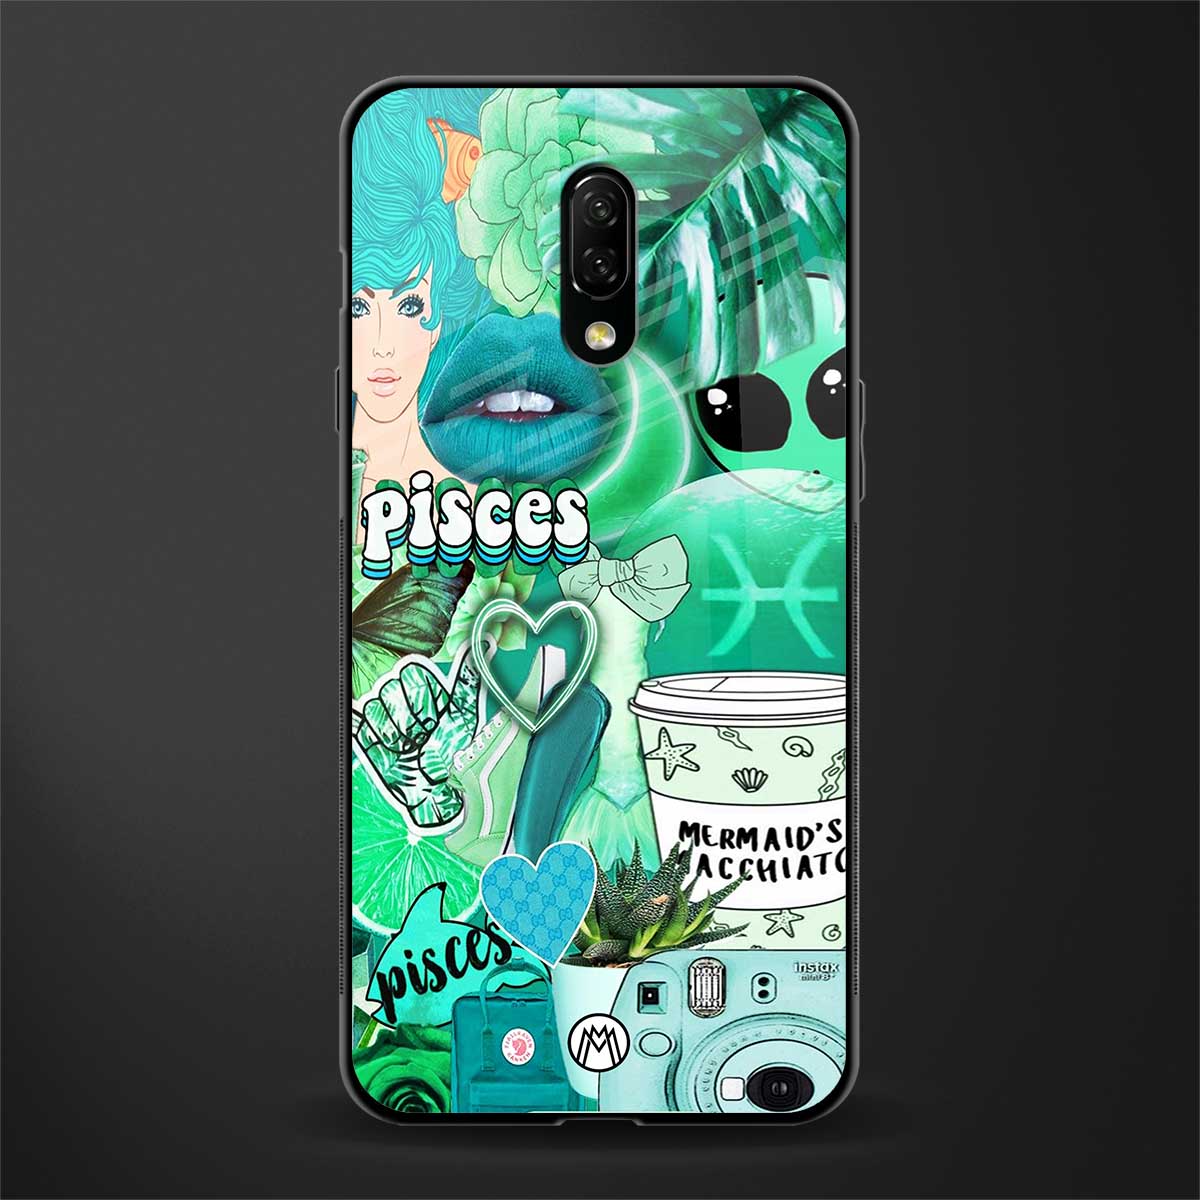 pisces aesthetic collage glass case for oneplus 7 image